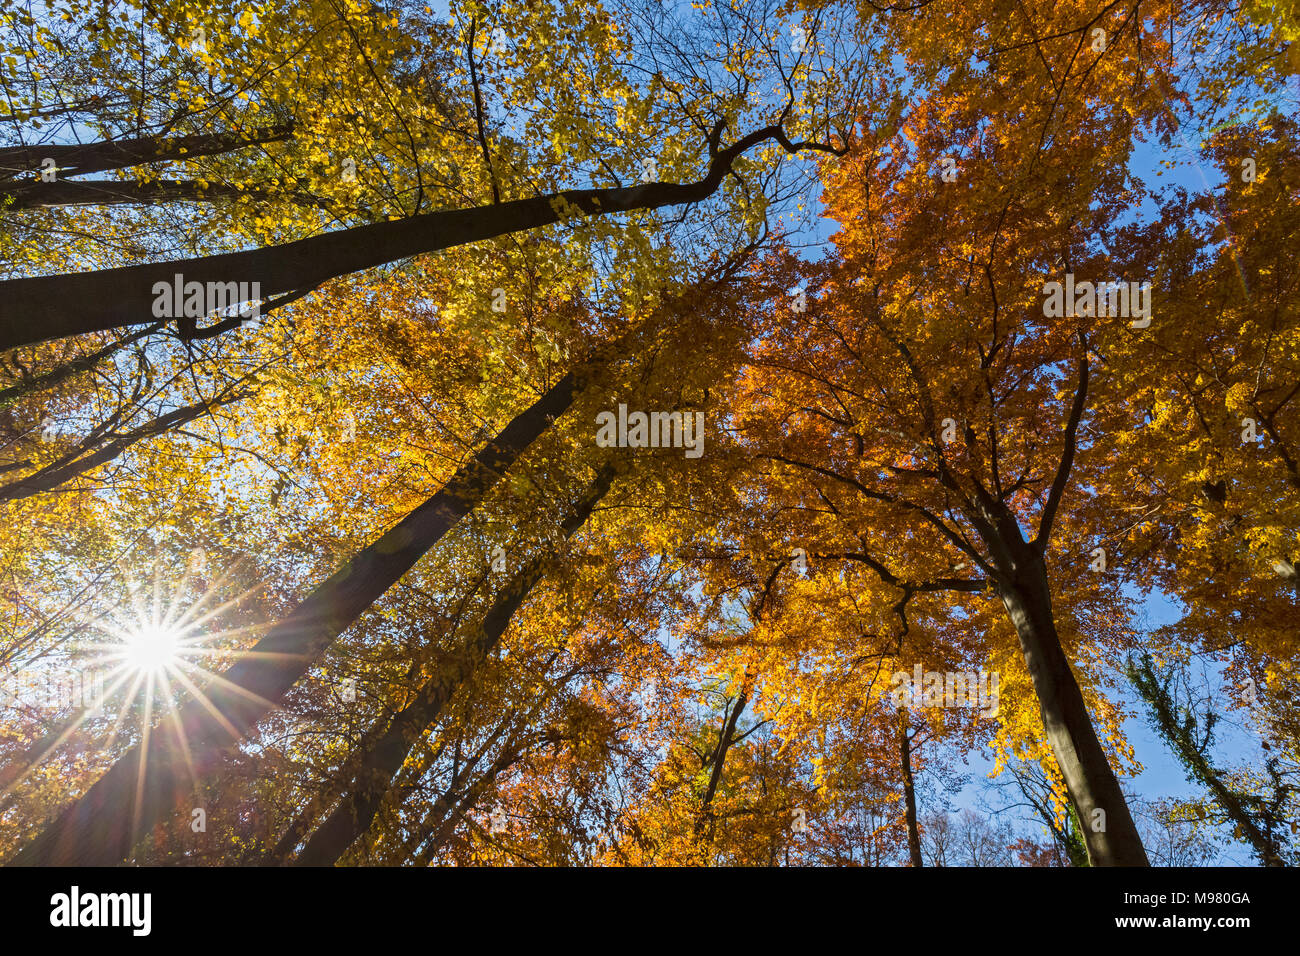 Germany, Bavaria, Munich, Deciduous trees in autumn Stock Photo